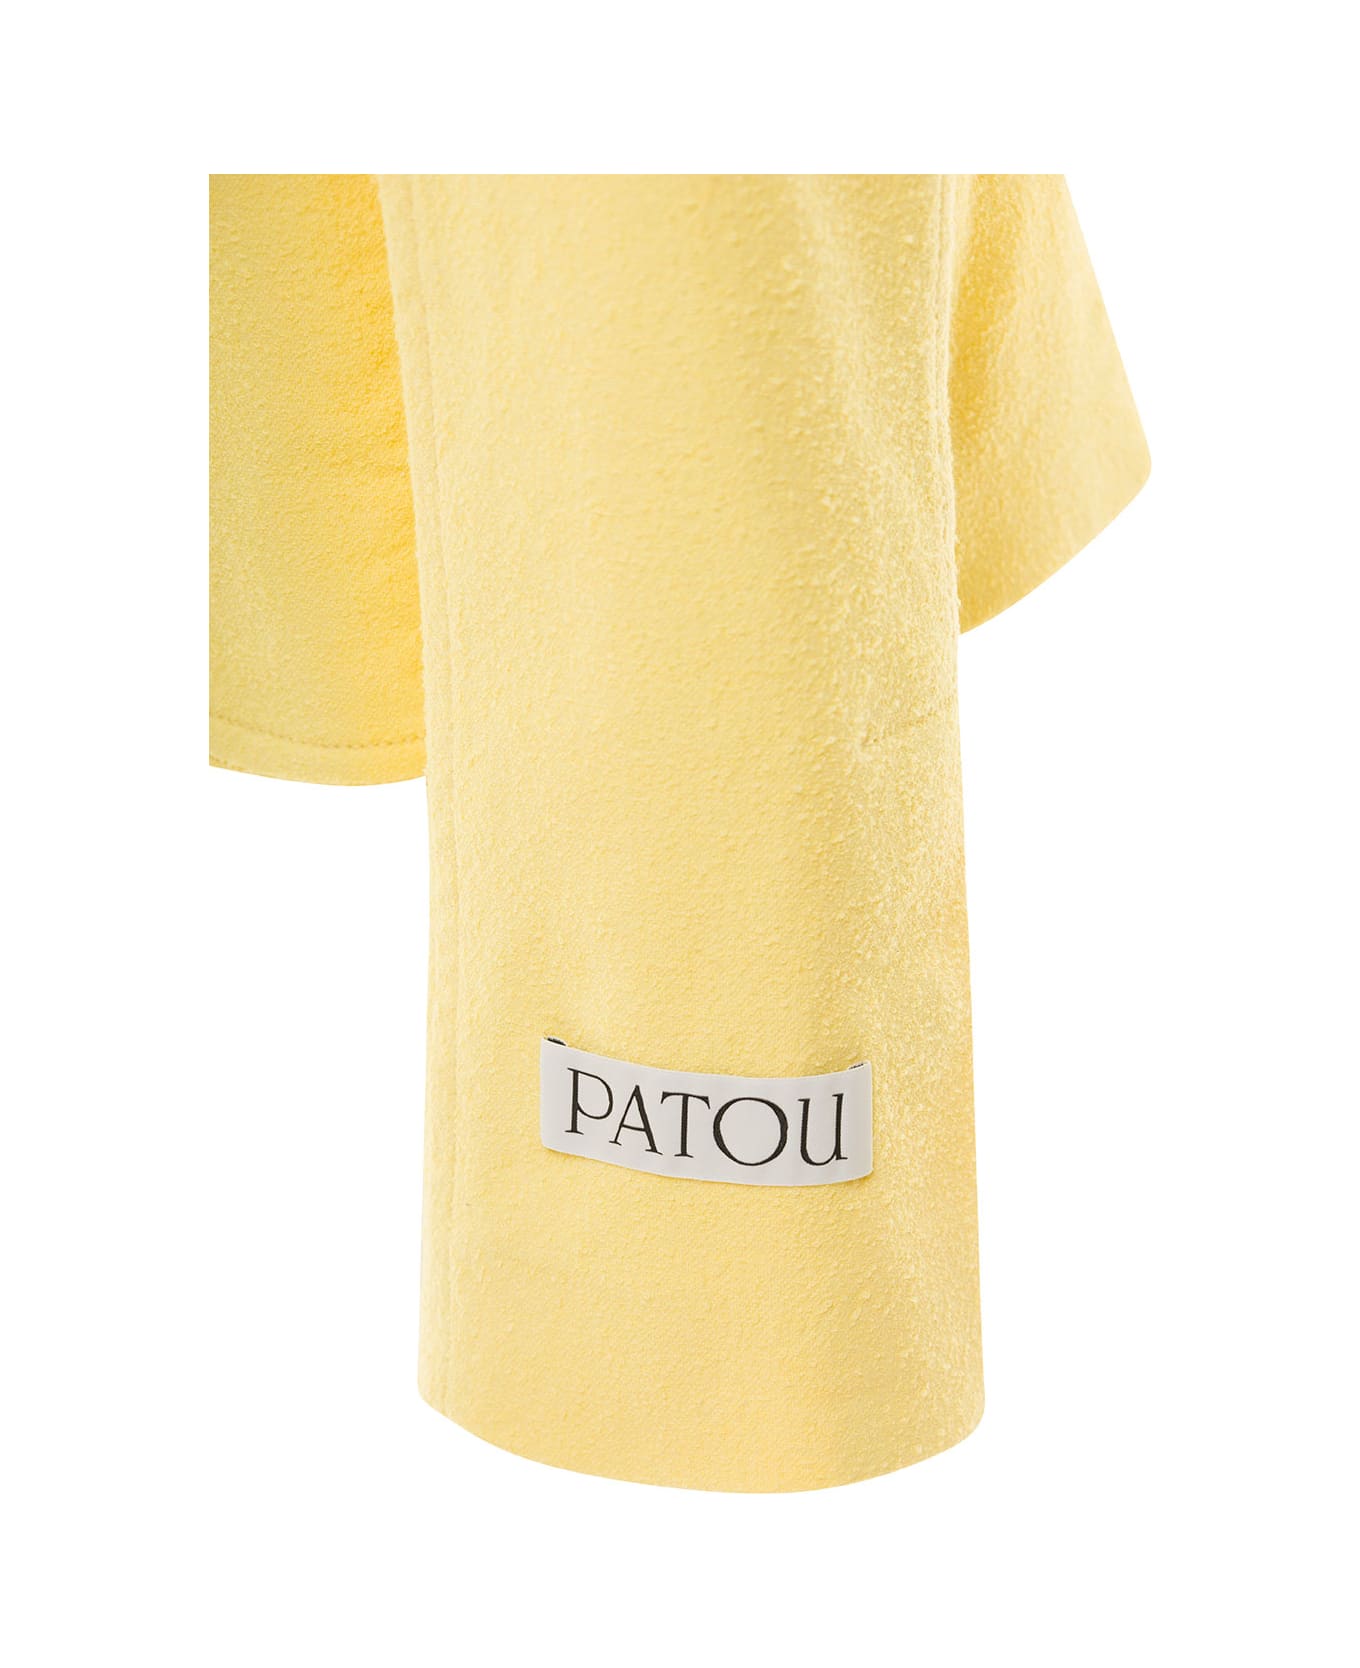 Patou Yellow Jacket With Branded Buttons In Cotton Blend Tweed Woman - Yellow ジャケット